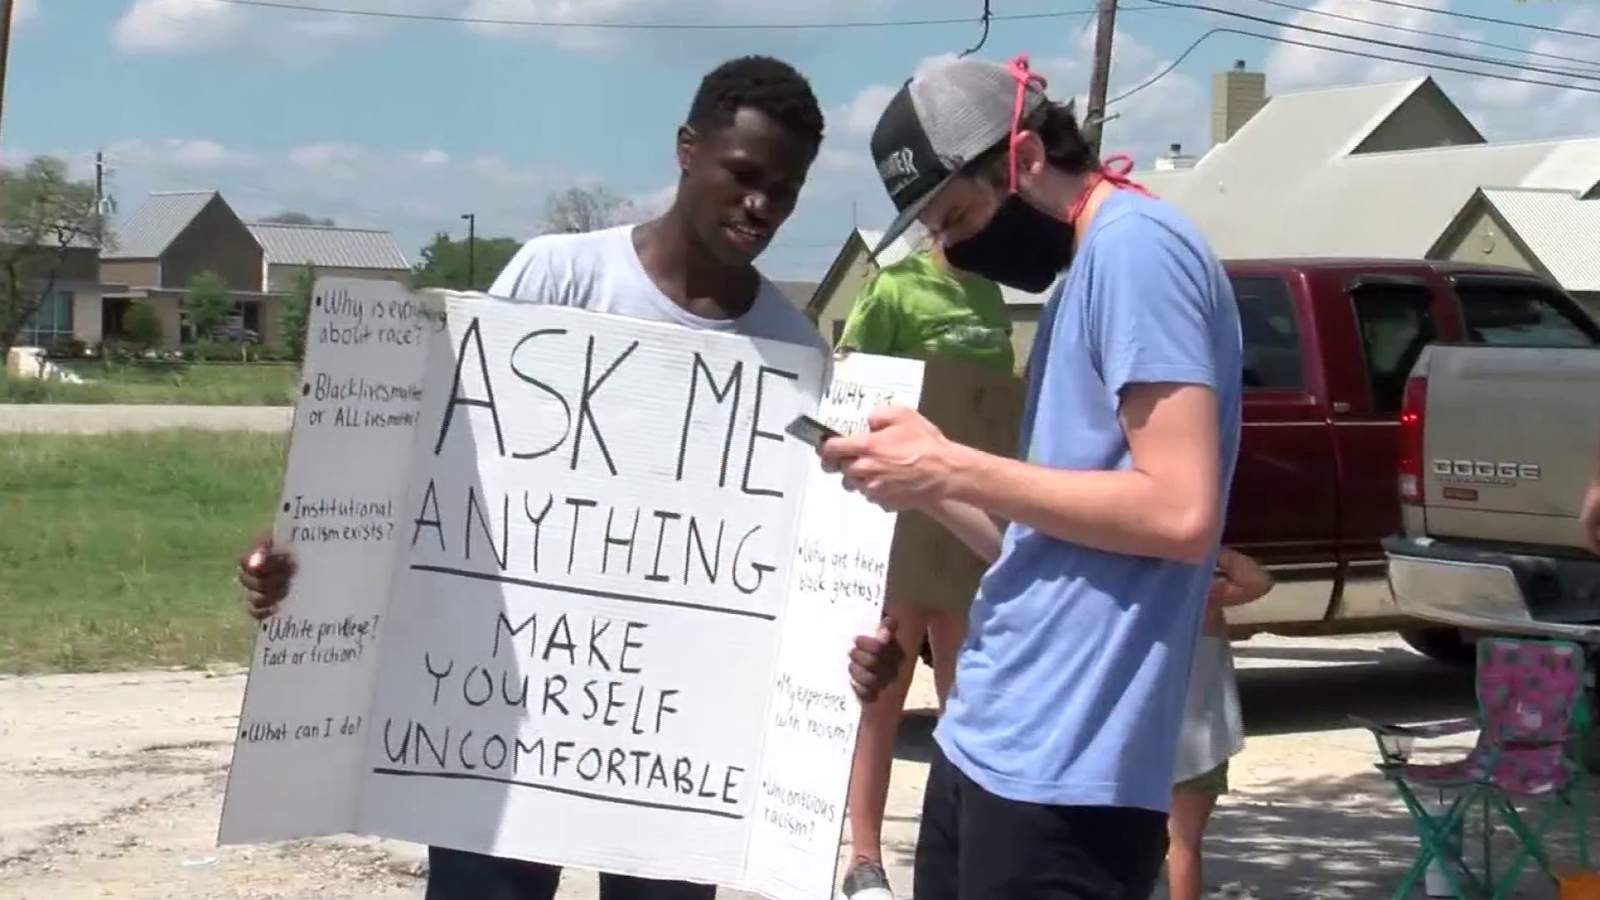 Texas man holds sign inviting his community to ask him anything about racism